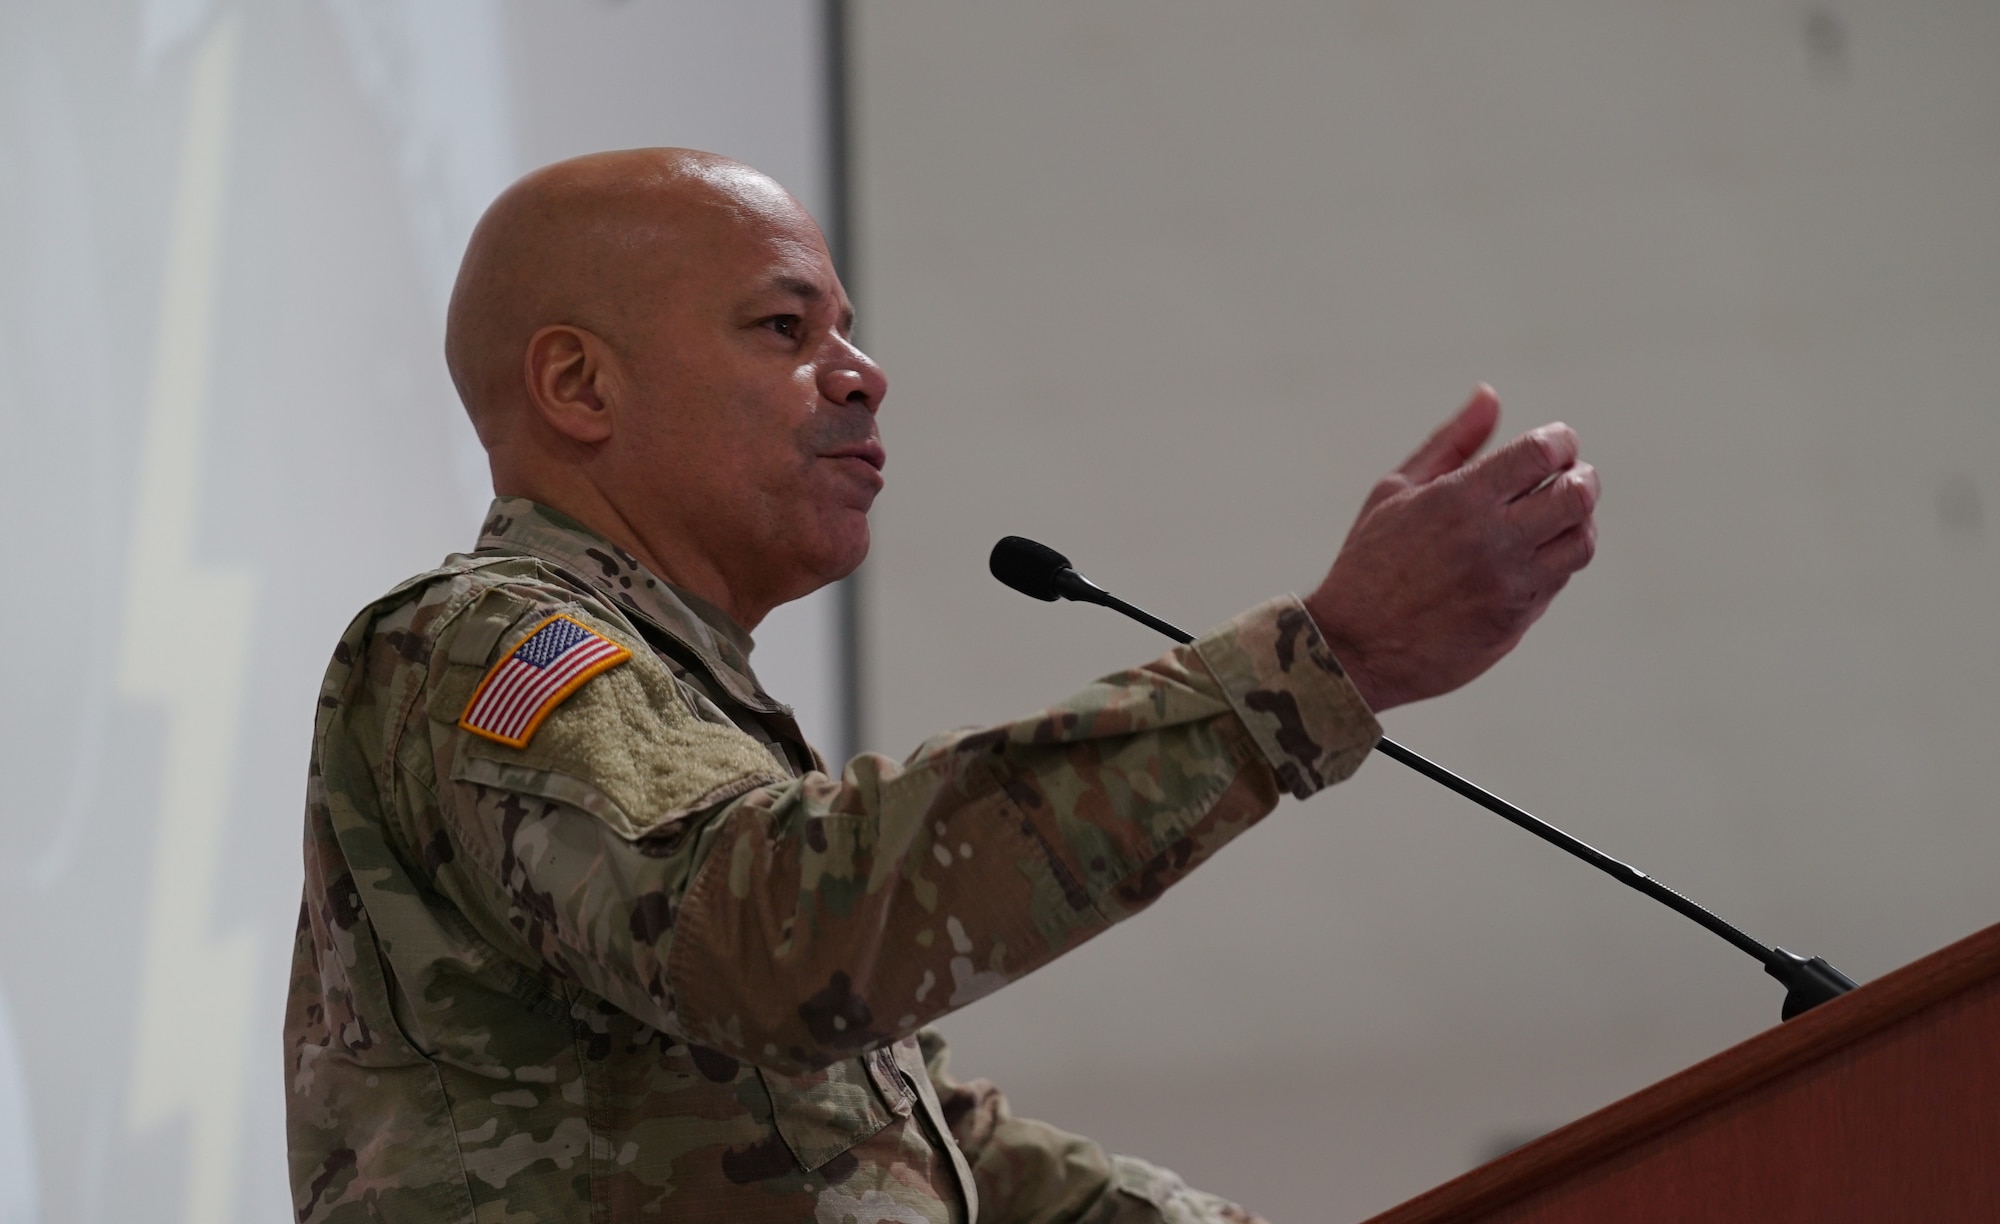 Maj. Gen. John C. Harris Jr., Ohio adjutant general, speaks during an event for local community leaders to learn about the capabilities of the MQ-9 Reaper at Springfield-Beckley Air National Guard Base, Ohio, March 18, 2024. Harris spoke on how the acquisition of the MQ-9 is an example of the Ohio Air National Guard’s continued readiness mission. (U.S. Air National Guard photo by Staff Sgt. Jillian Maynus)